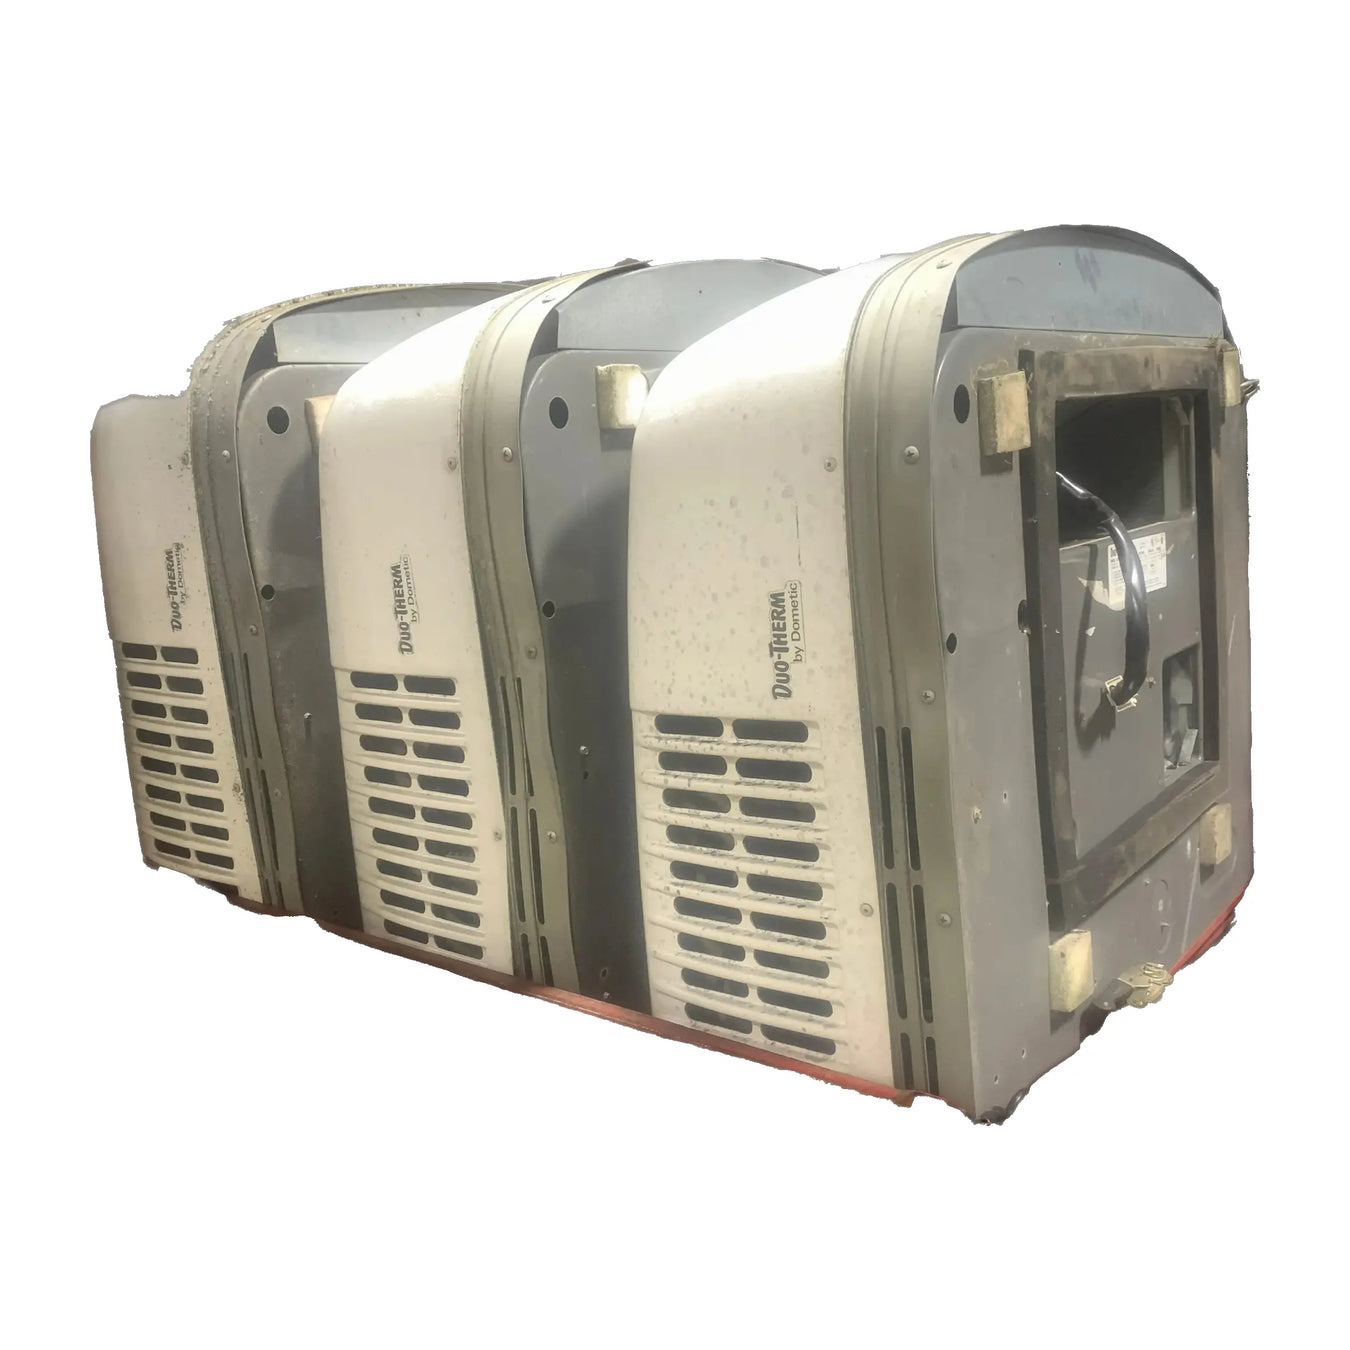 Used RV A/C Units - Complete